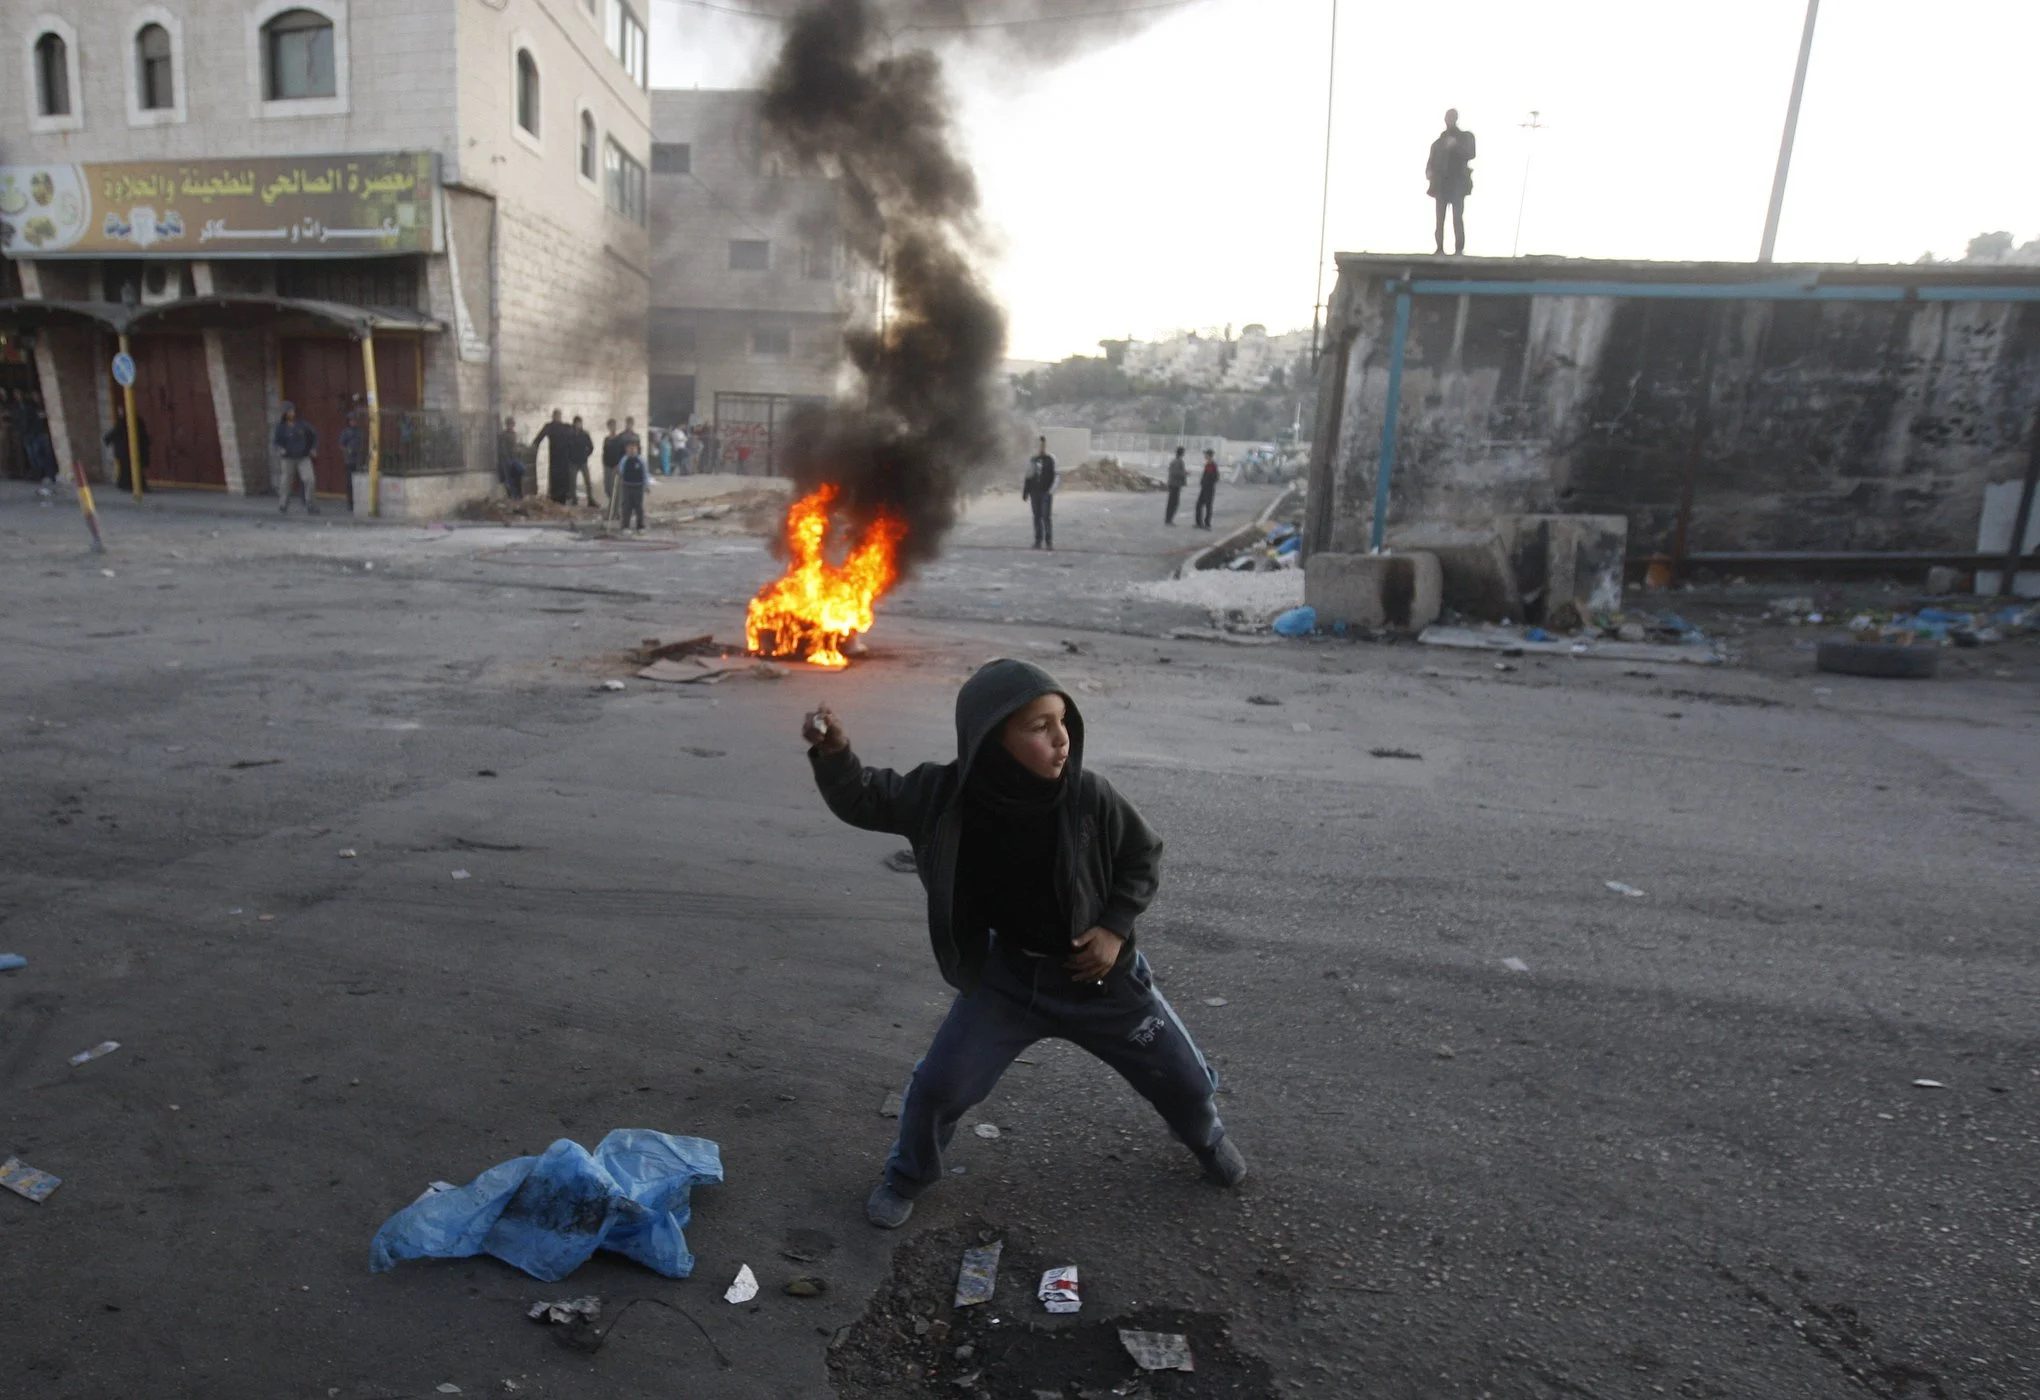 A Palestinian child throws a stone at Israeli occupation forces, 2011. Photo via Reddit